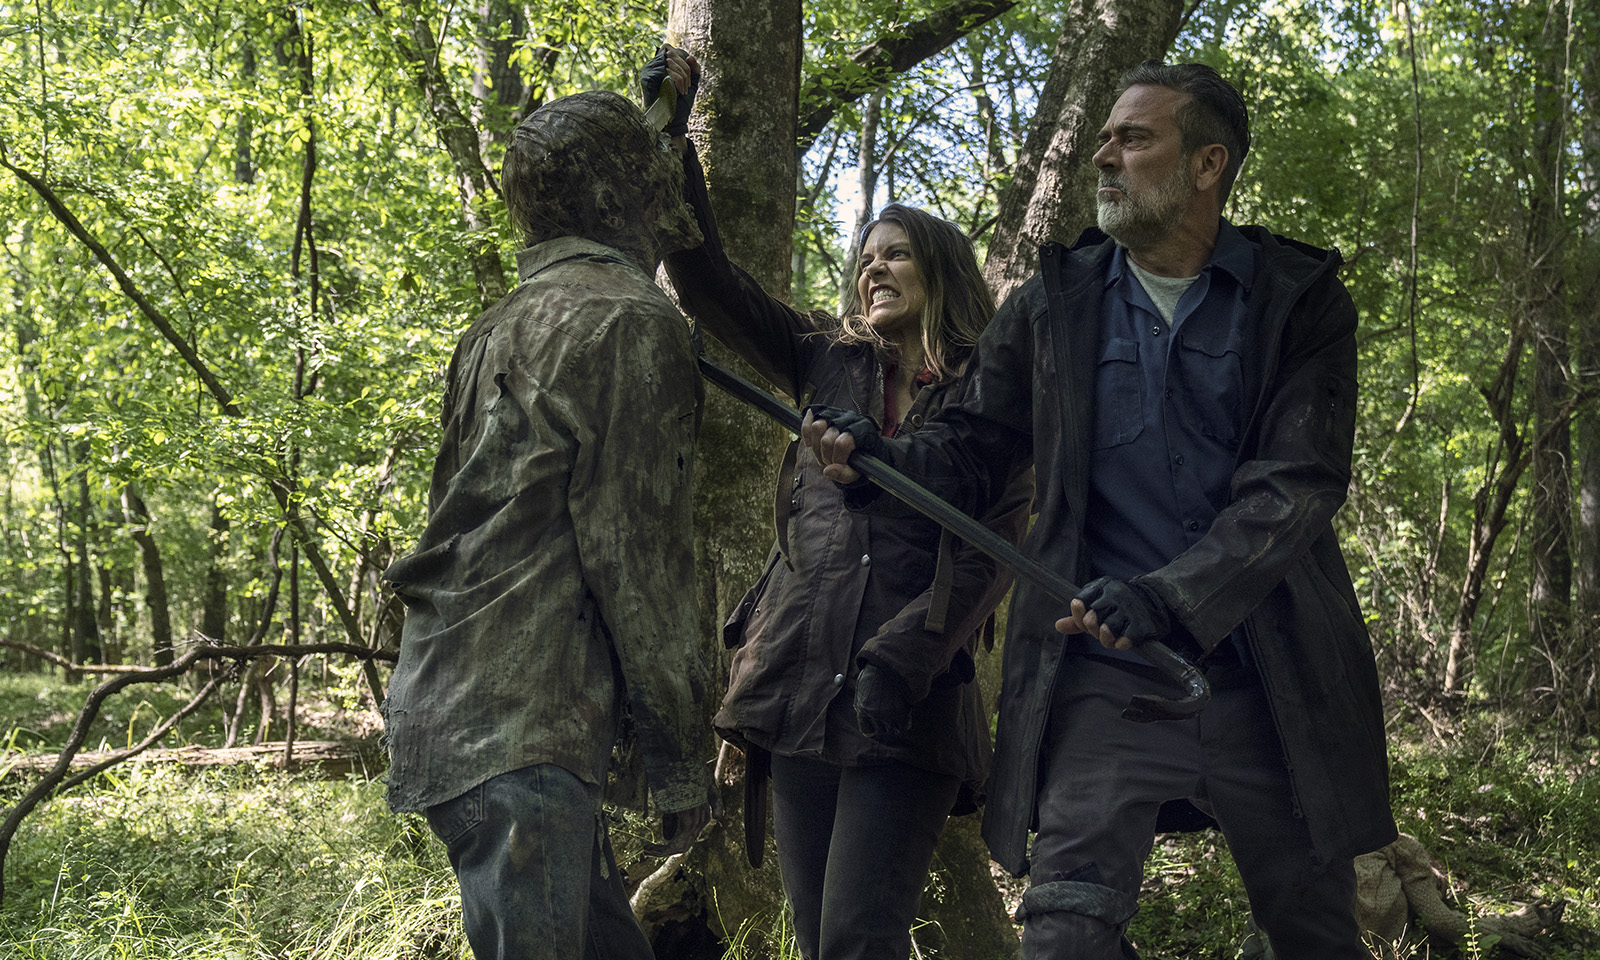 Maggie and Negan killing a zombie in a scene from season 11 of The Walking Dead.